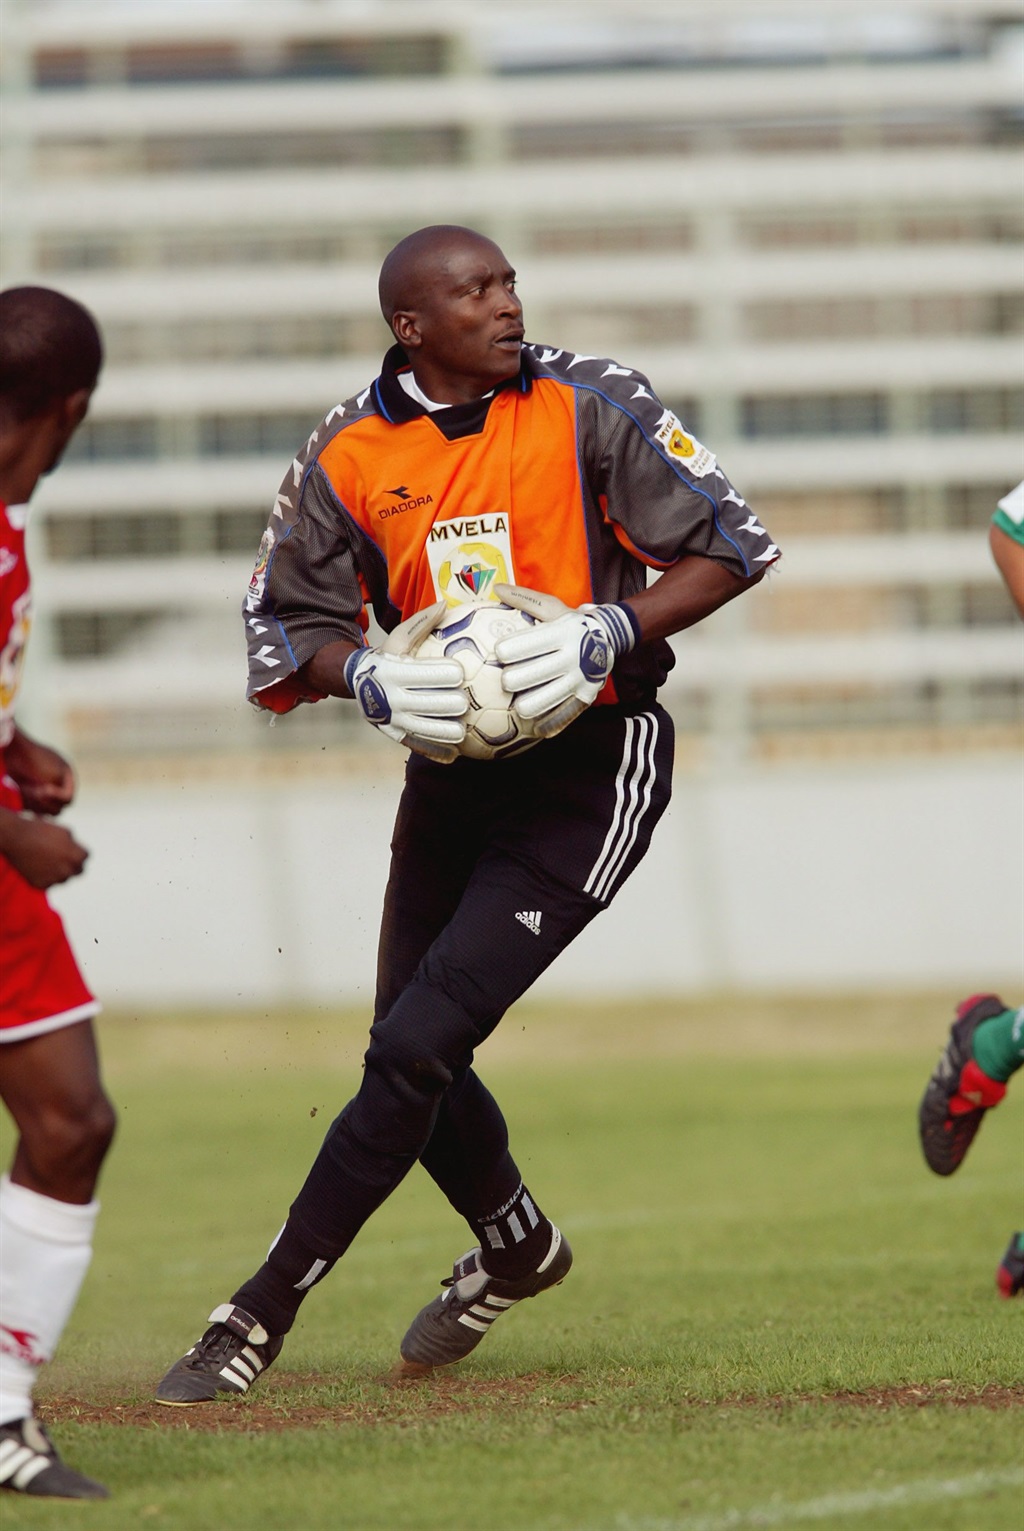 BLOEMFONTEIN, SOUTH AFRICA : 30 October 2004, Silver Shabalala during the Mvela Golden League match between Bloemfontein Young Tigers and Zulu Royals at Seisa Ramabodu Stadium in Bloemfontein, South Africa. Photo Credit : - Gallo Images